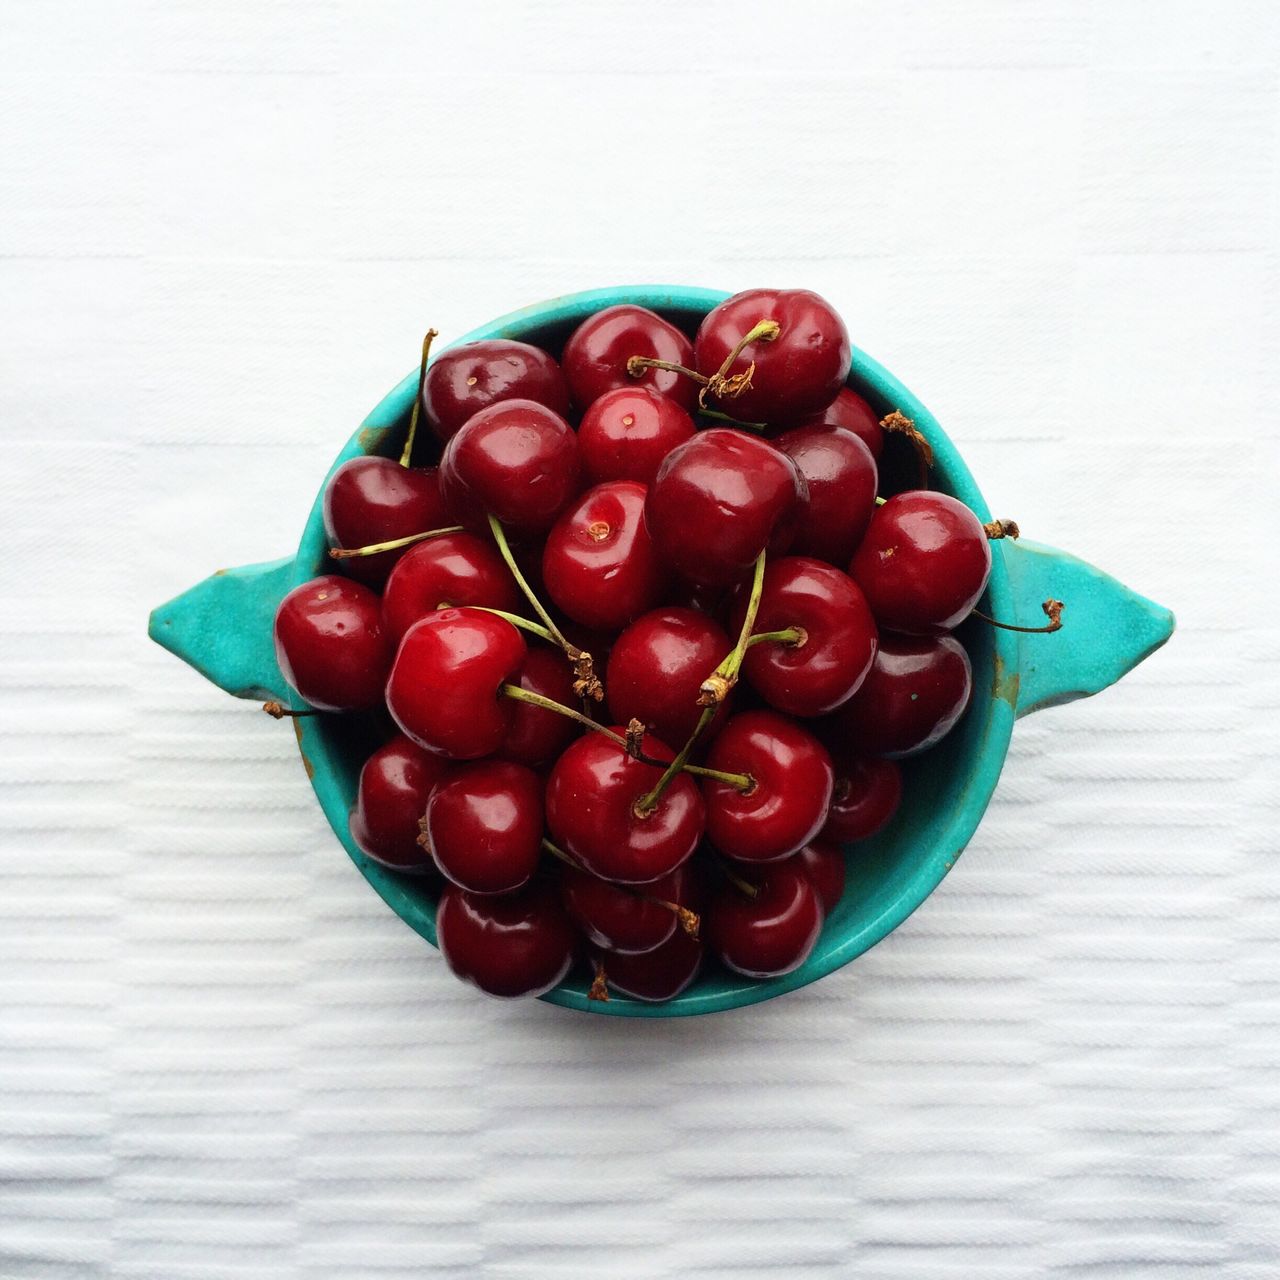 Directly above shot of cherries in bowl on floor